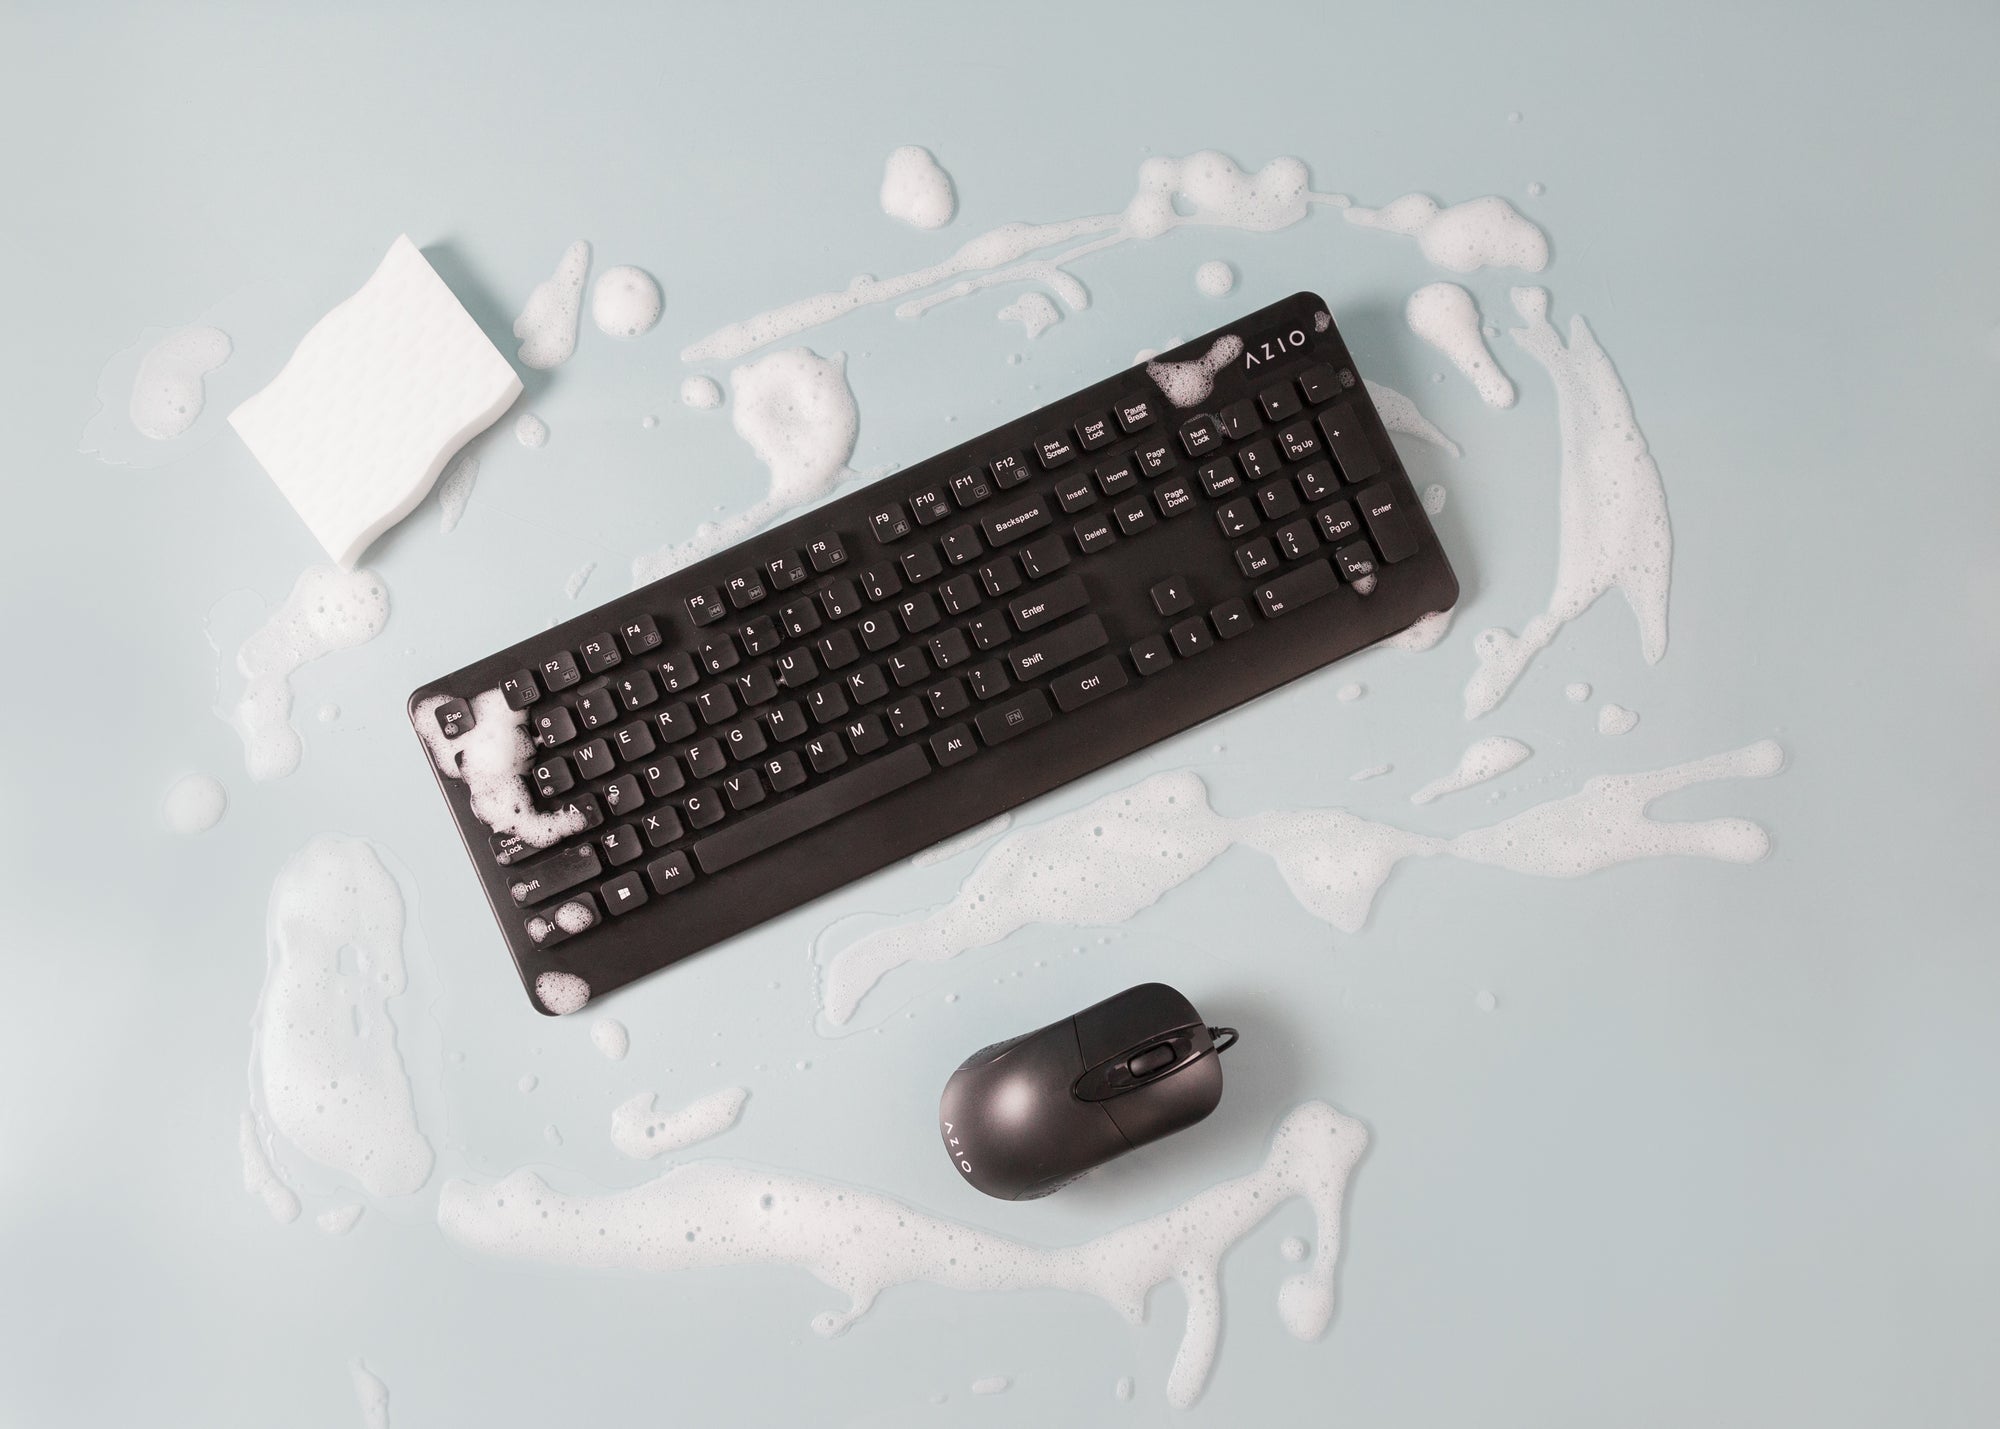 Press Release: Azio launches Antimicrobial & Waterproof Keyboard/Mouse Line